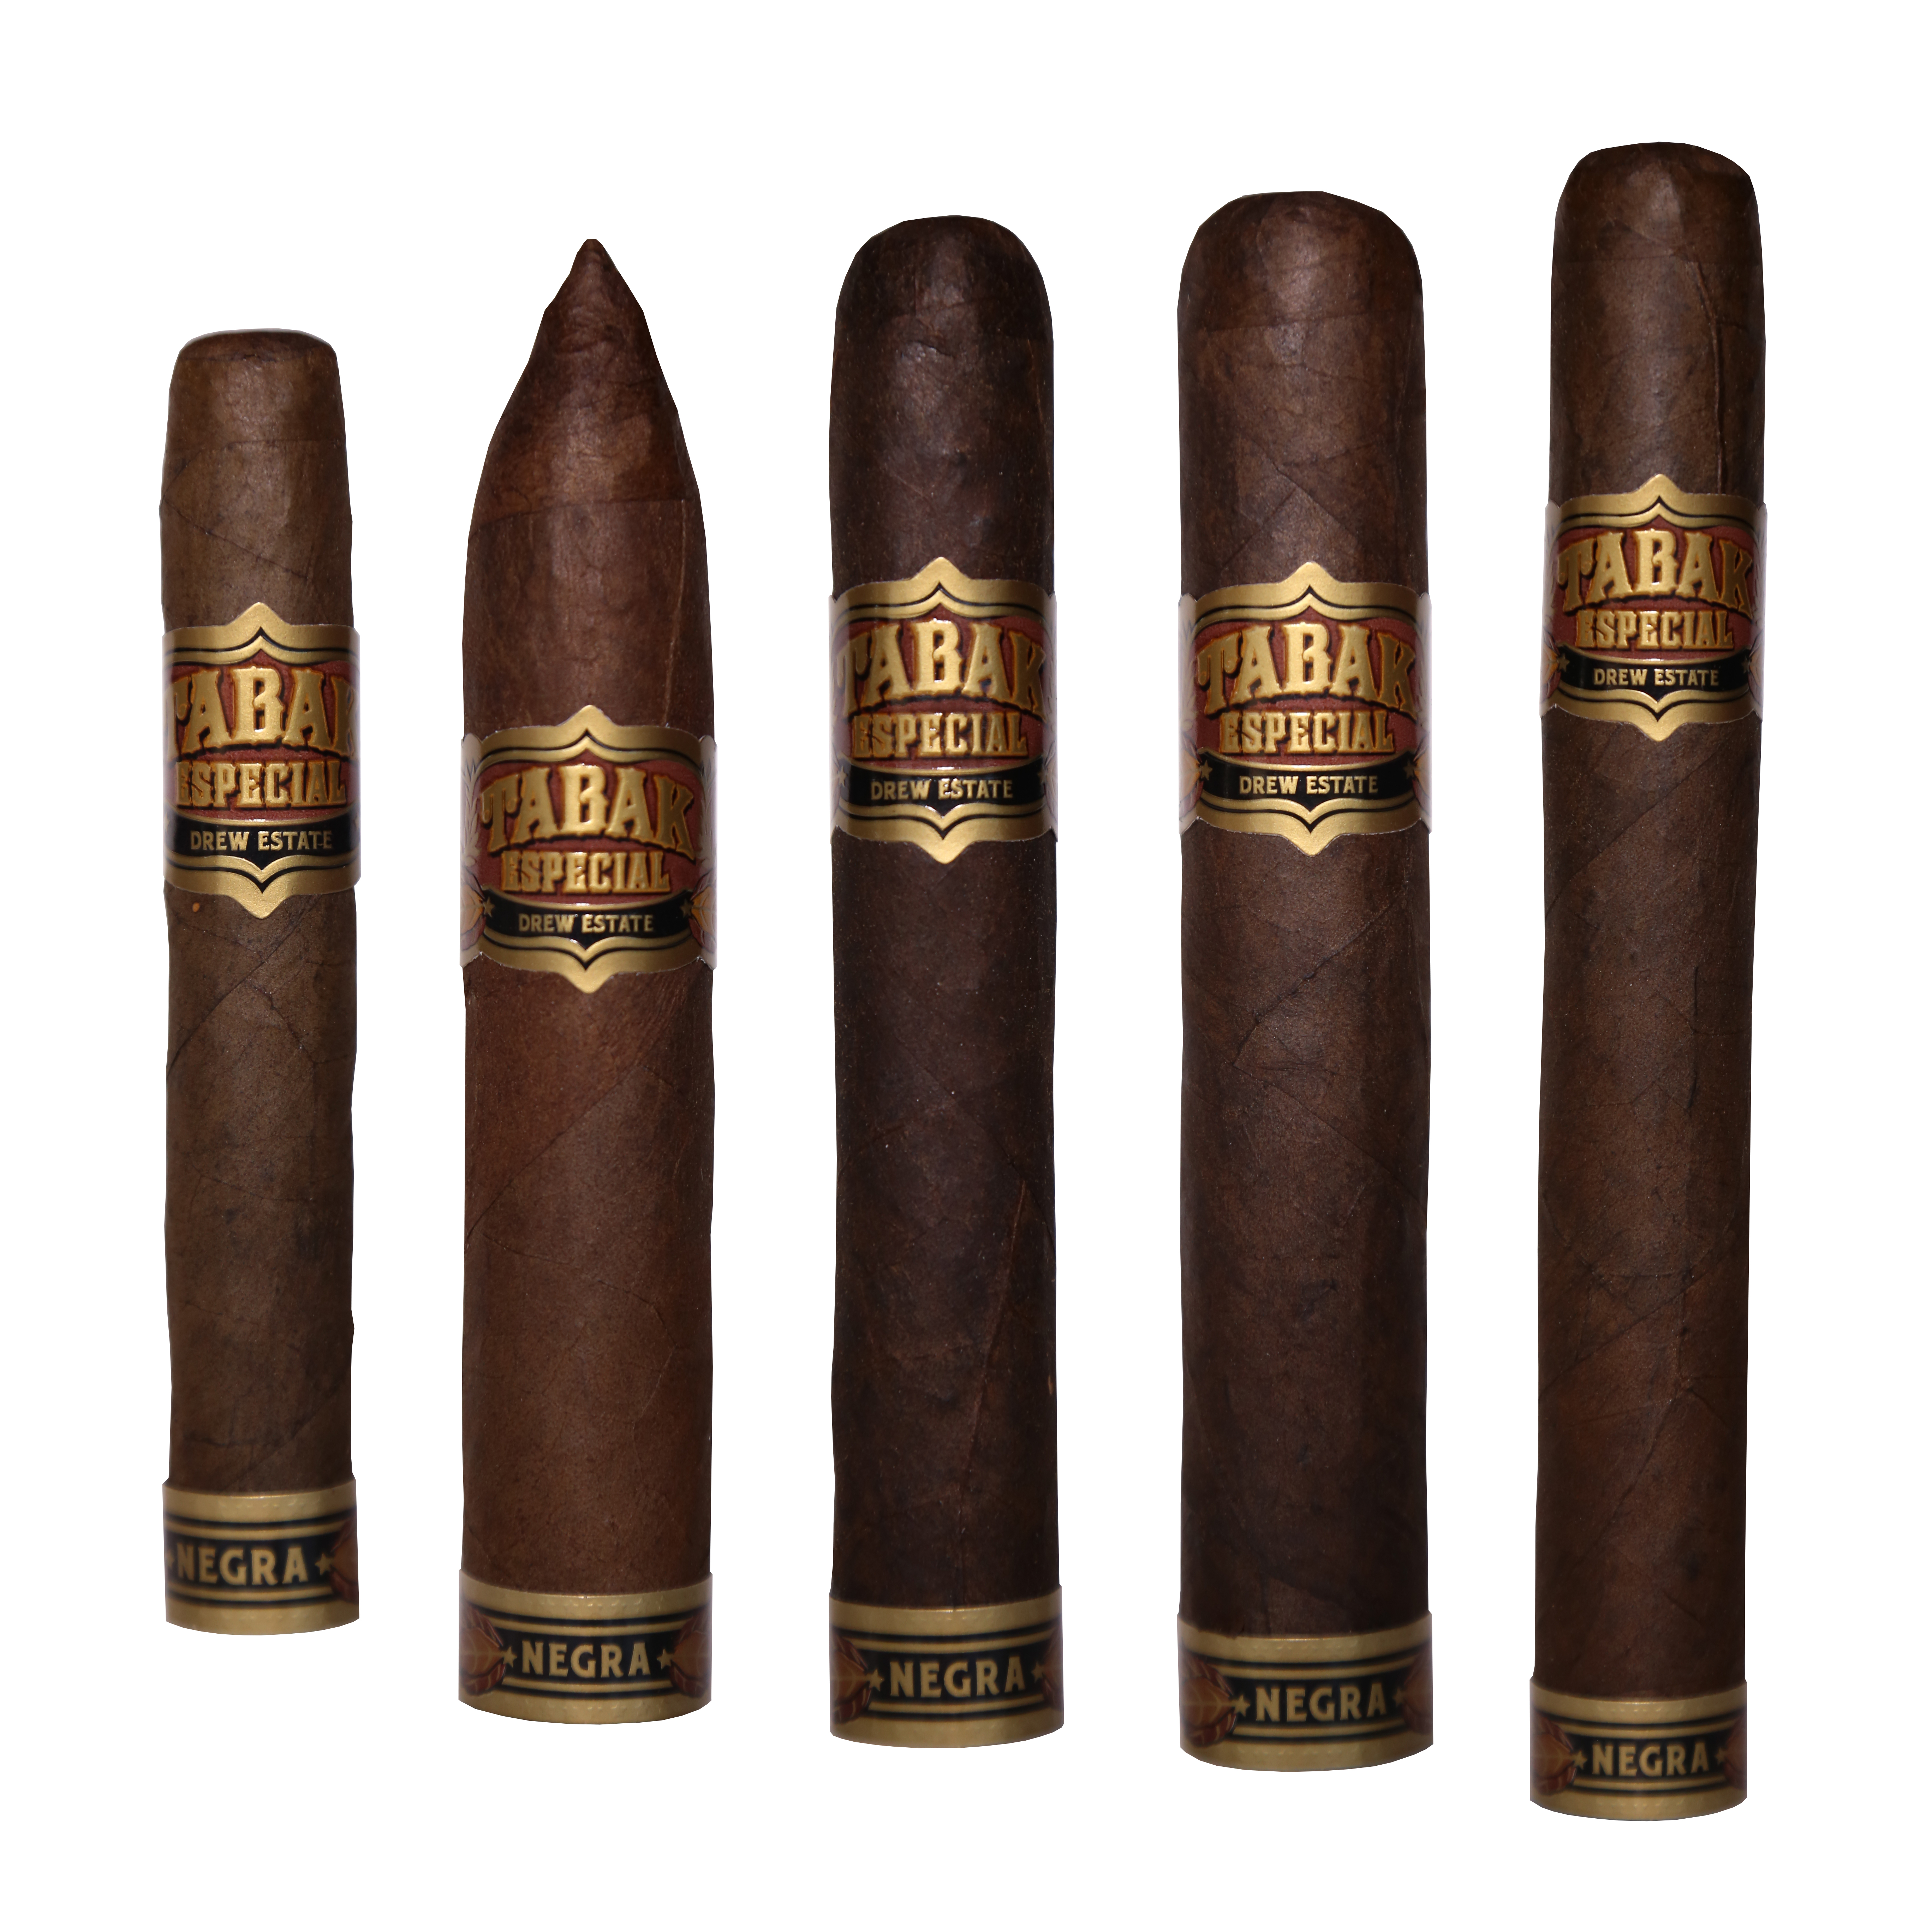 Drew Estate announces packaging updates to Tabak Especial at IPCPR